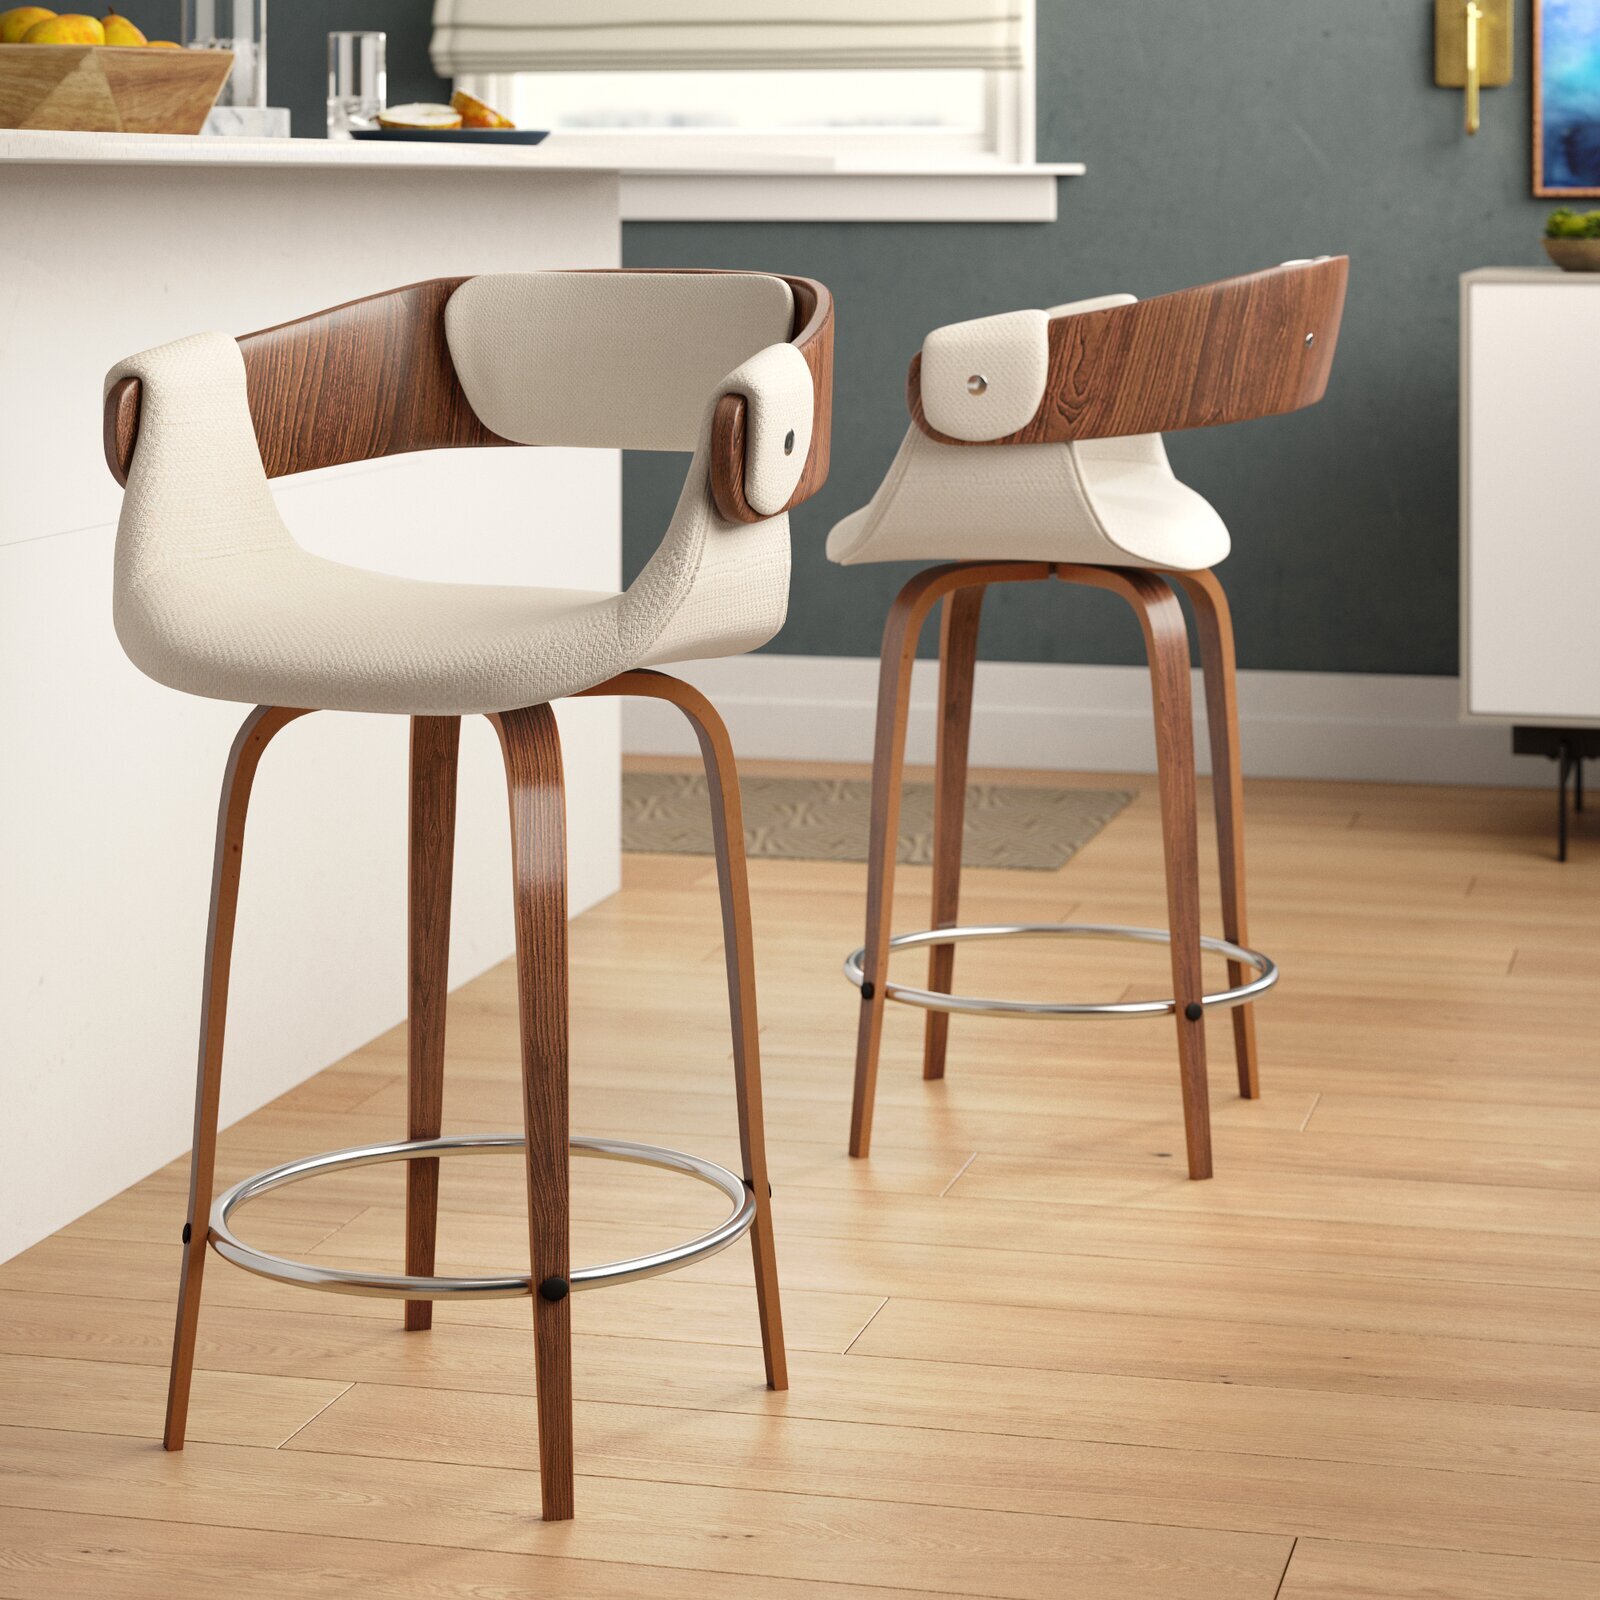 Eames like leather swivel counter stools with backs and arms